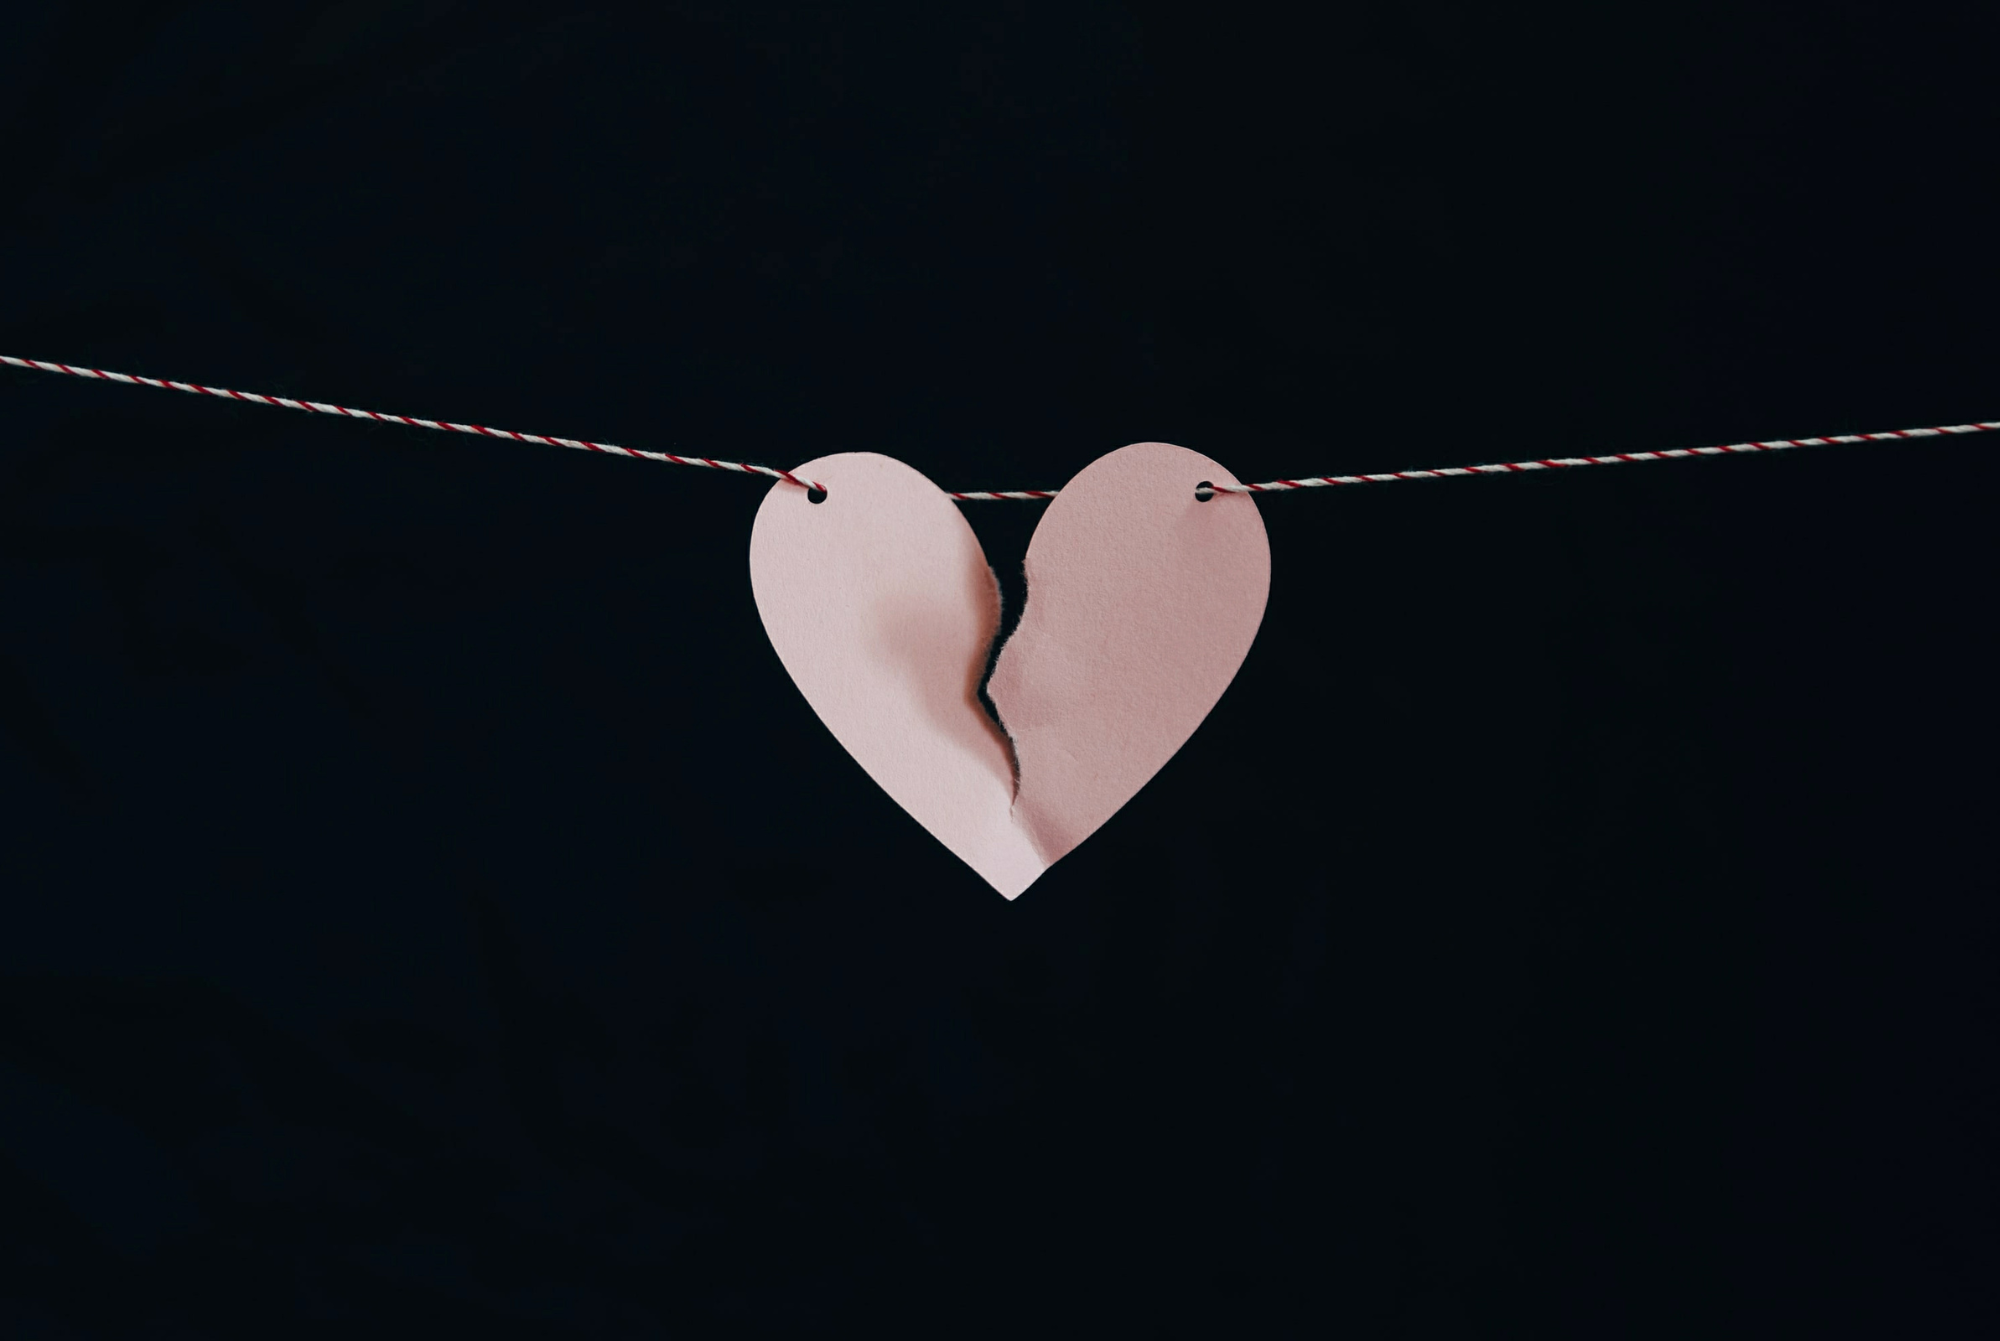 A tween or teen girl's craft pink heart on a string hangs ripped in half against a black background.